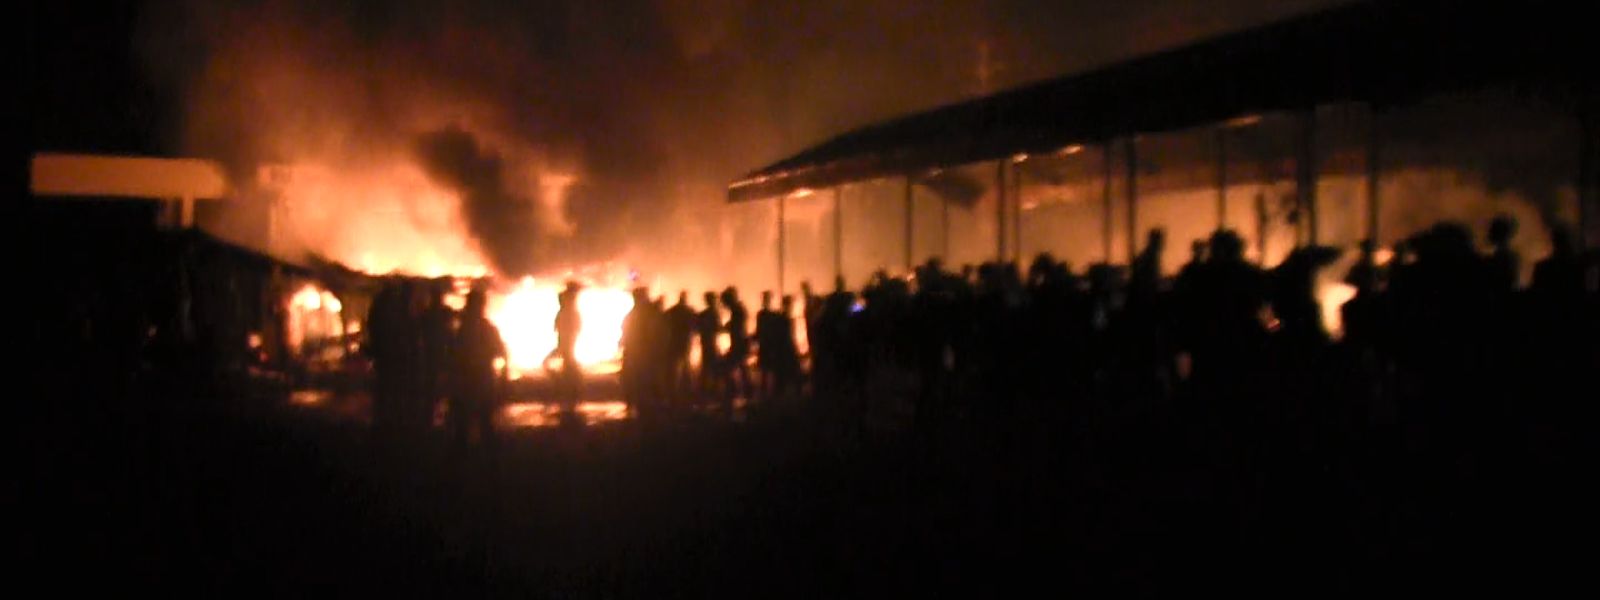 Fire destroys around 30 shops in Mawanella town